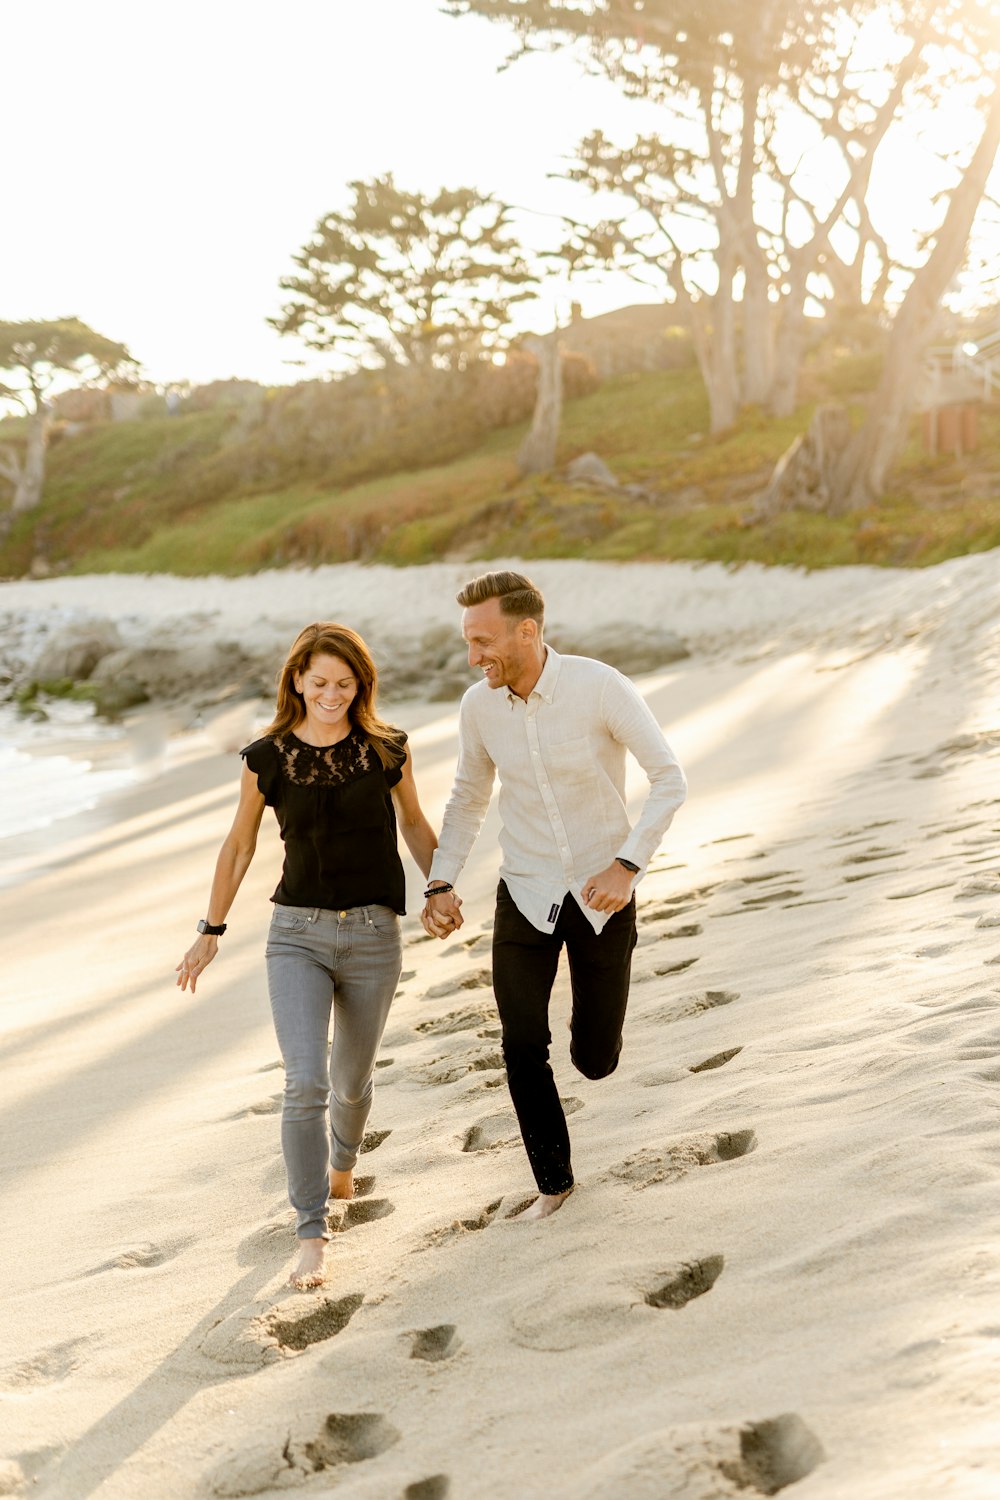 man in white dress shirt and woman in black dress walking on beach during daytime